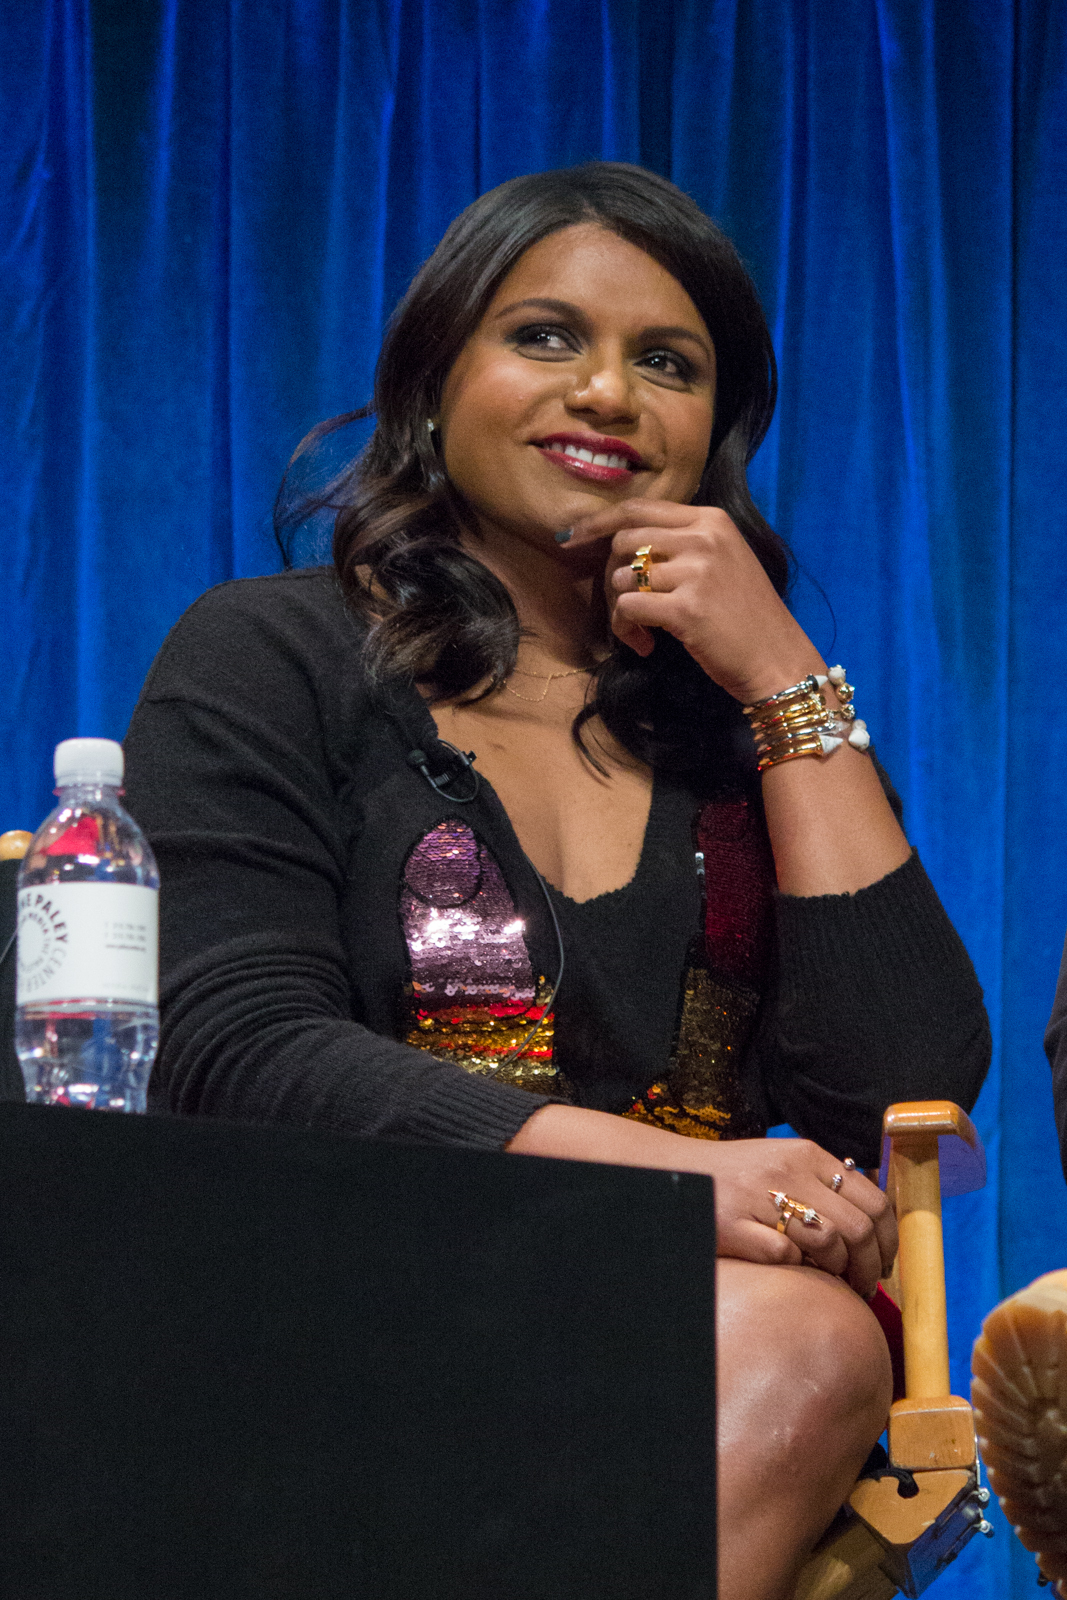 top-plus-grandes-meilleures-showrunneuses-fnac-mindy-kaling-the-office-us-mindy-project-mes-premieres-fois-never-have-i-ever